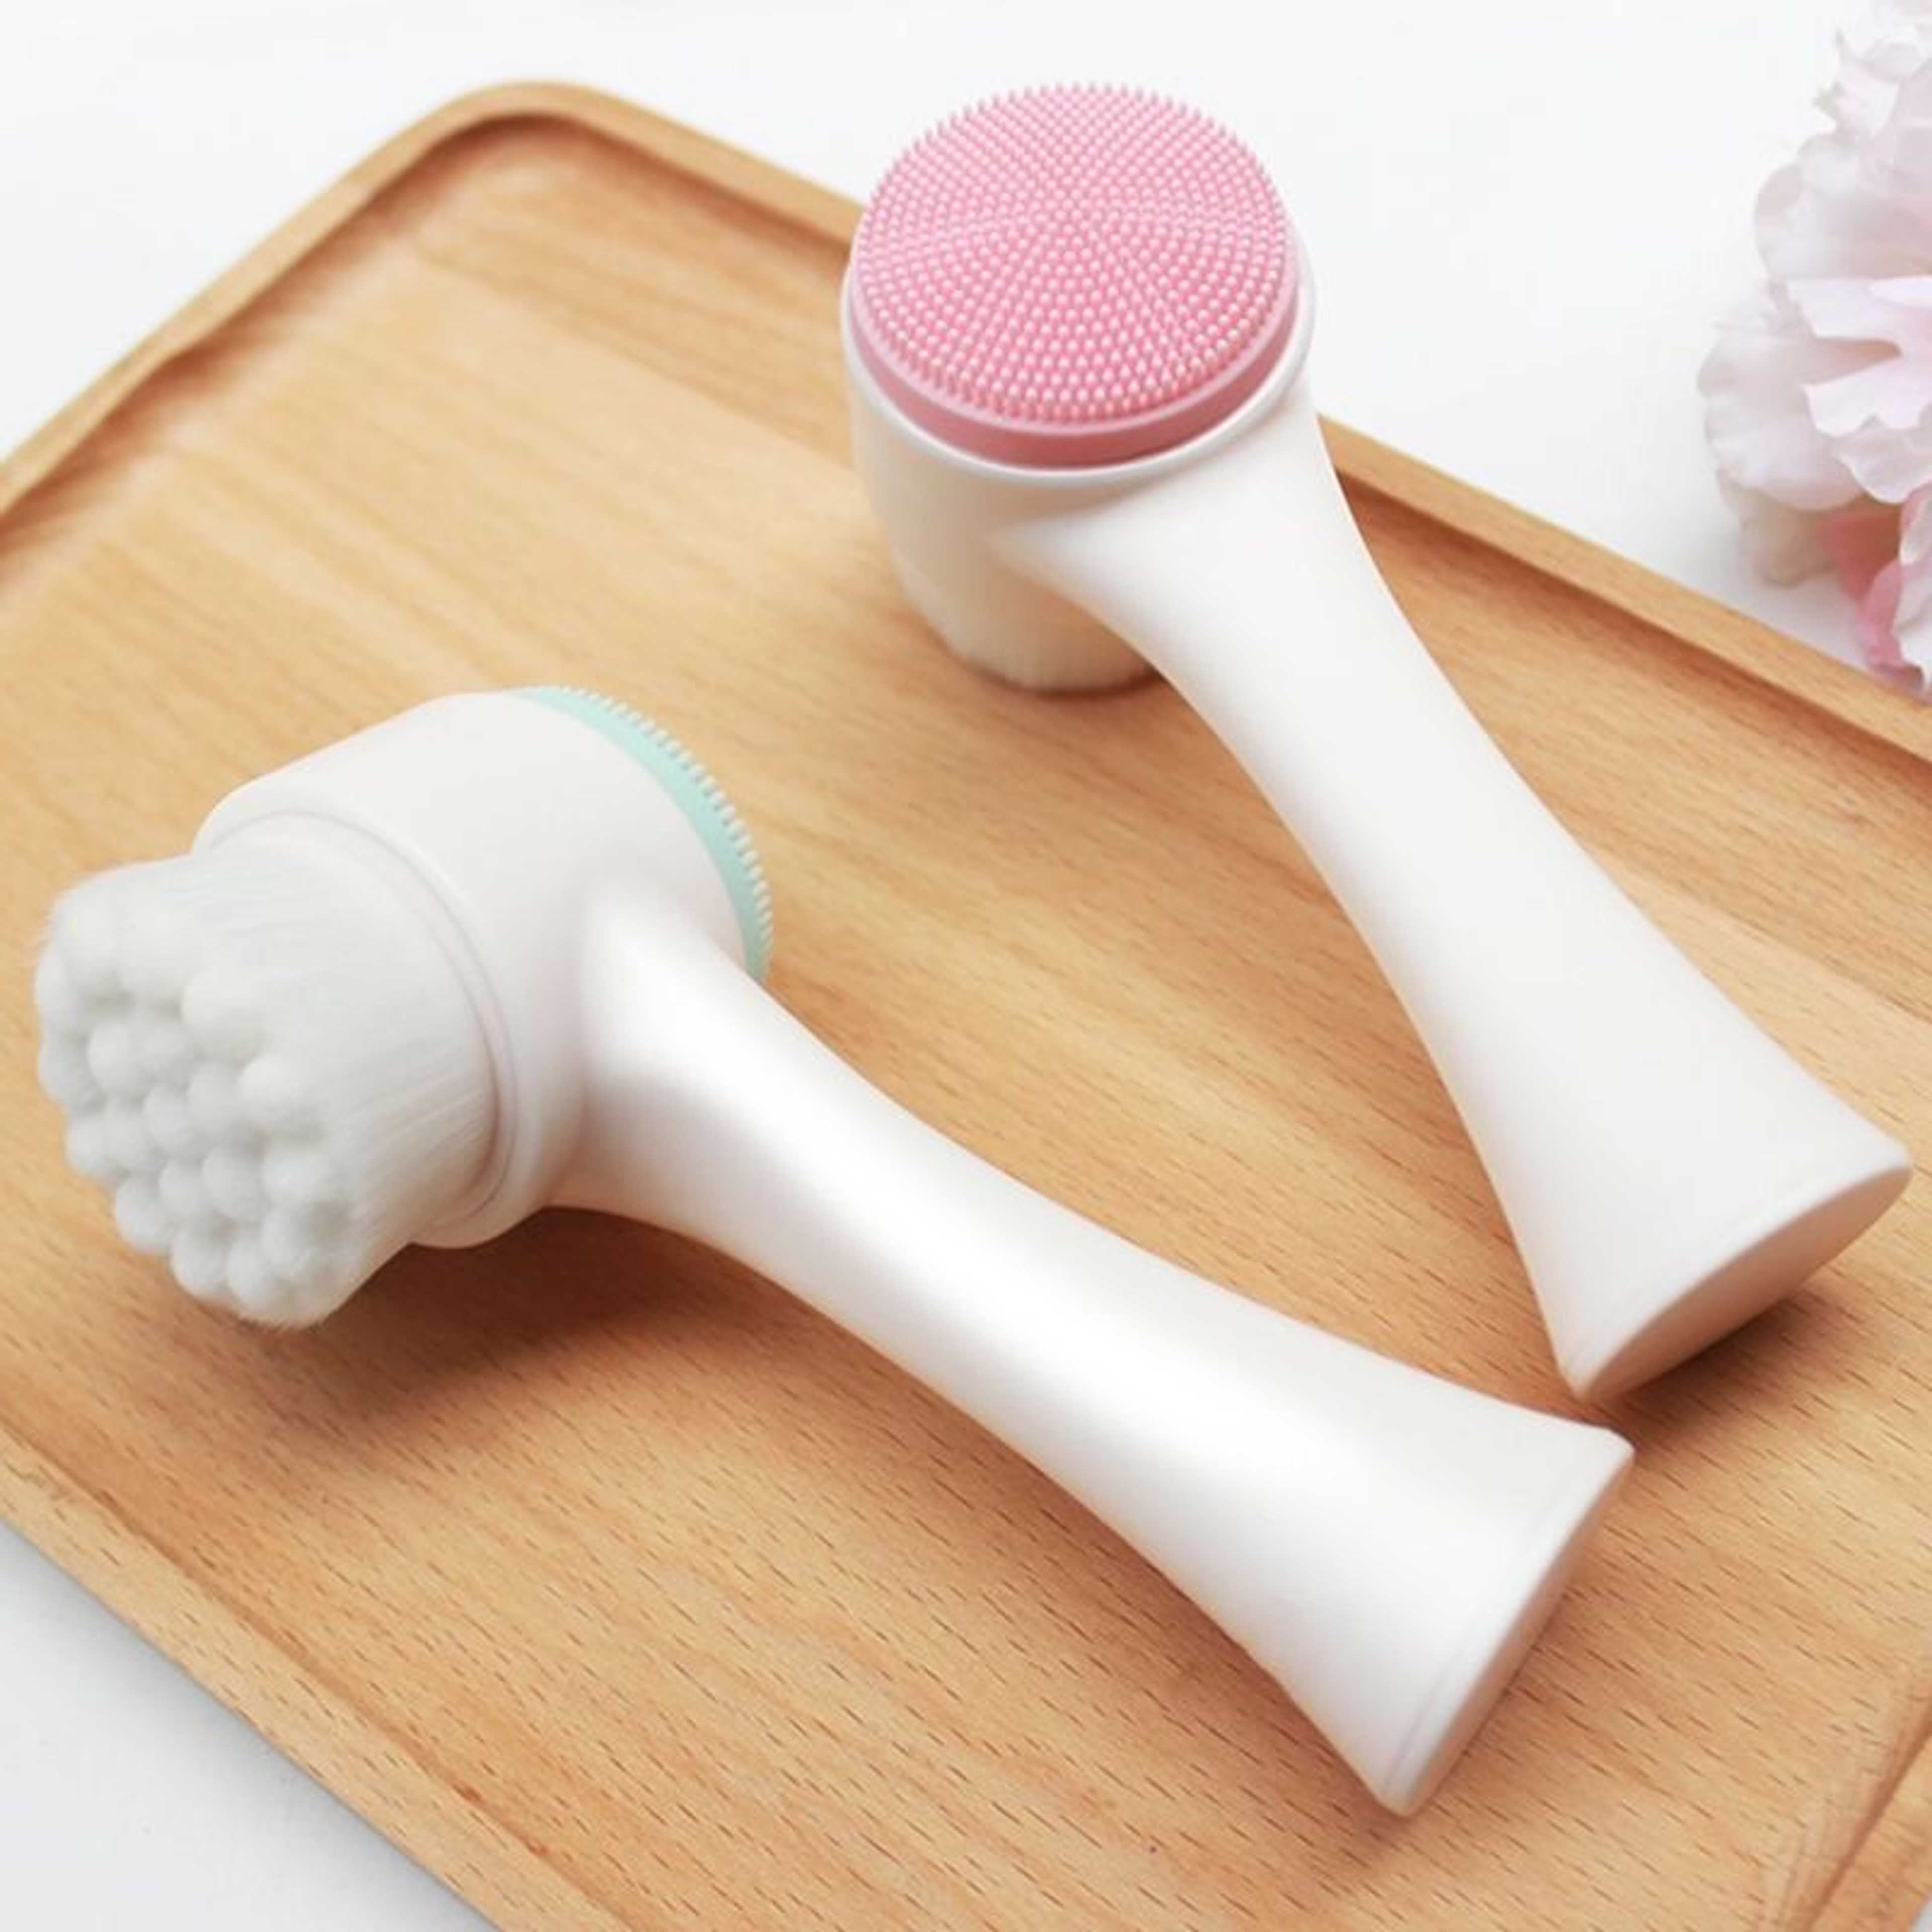 Double Sided Silicone Facial Cleanser Brush Manual Blackhead Removal Brush Facial Cleansing Massage Brush Face Skin Care Tool